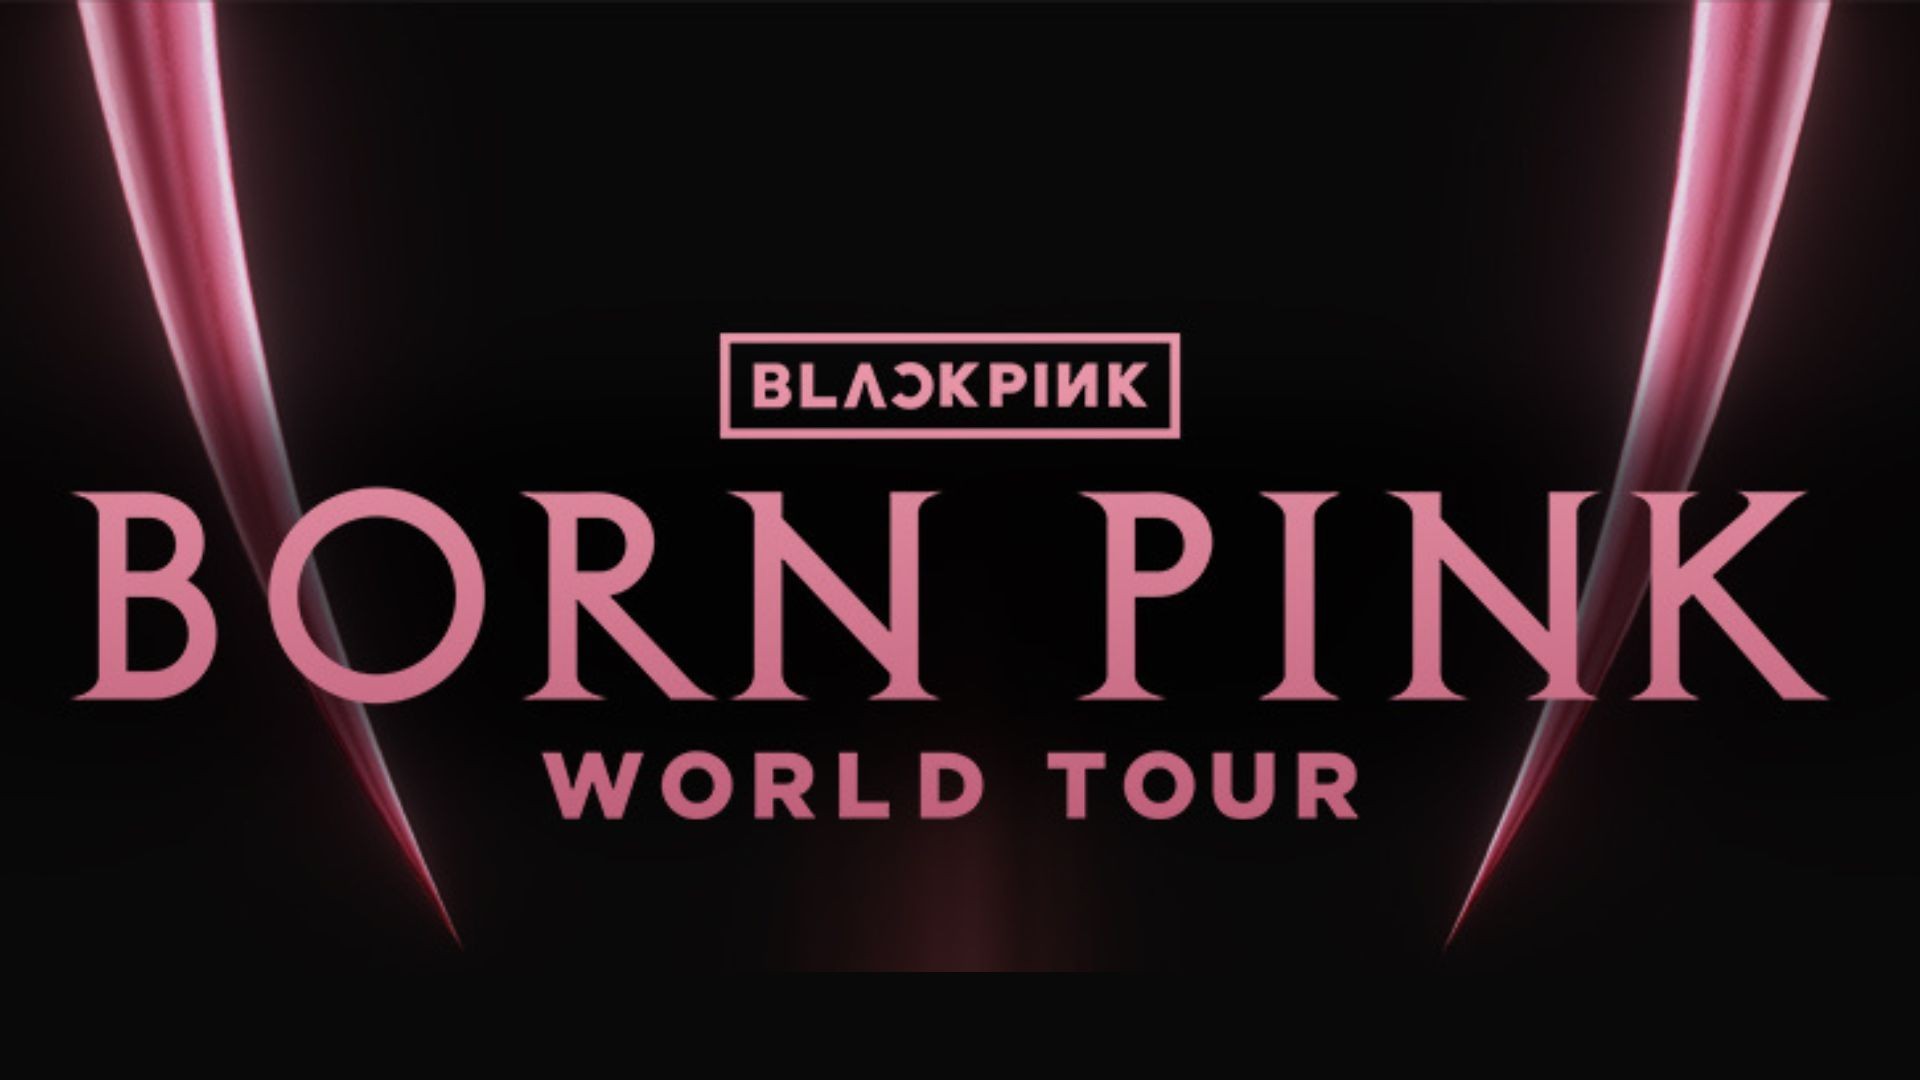 BLACKPINK's BORN PINK world tour is here: Dates and cities announced